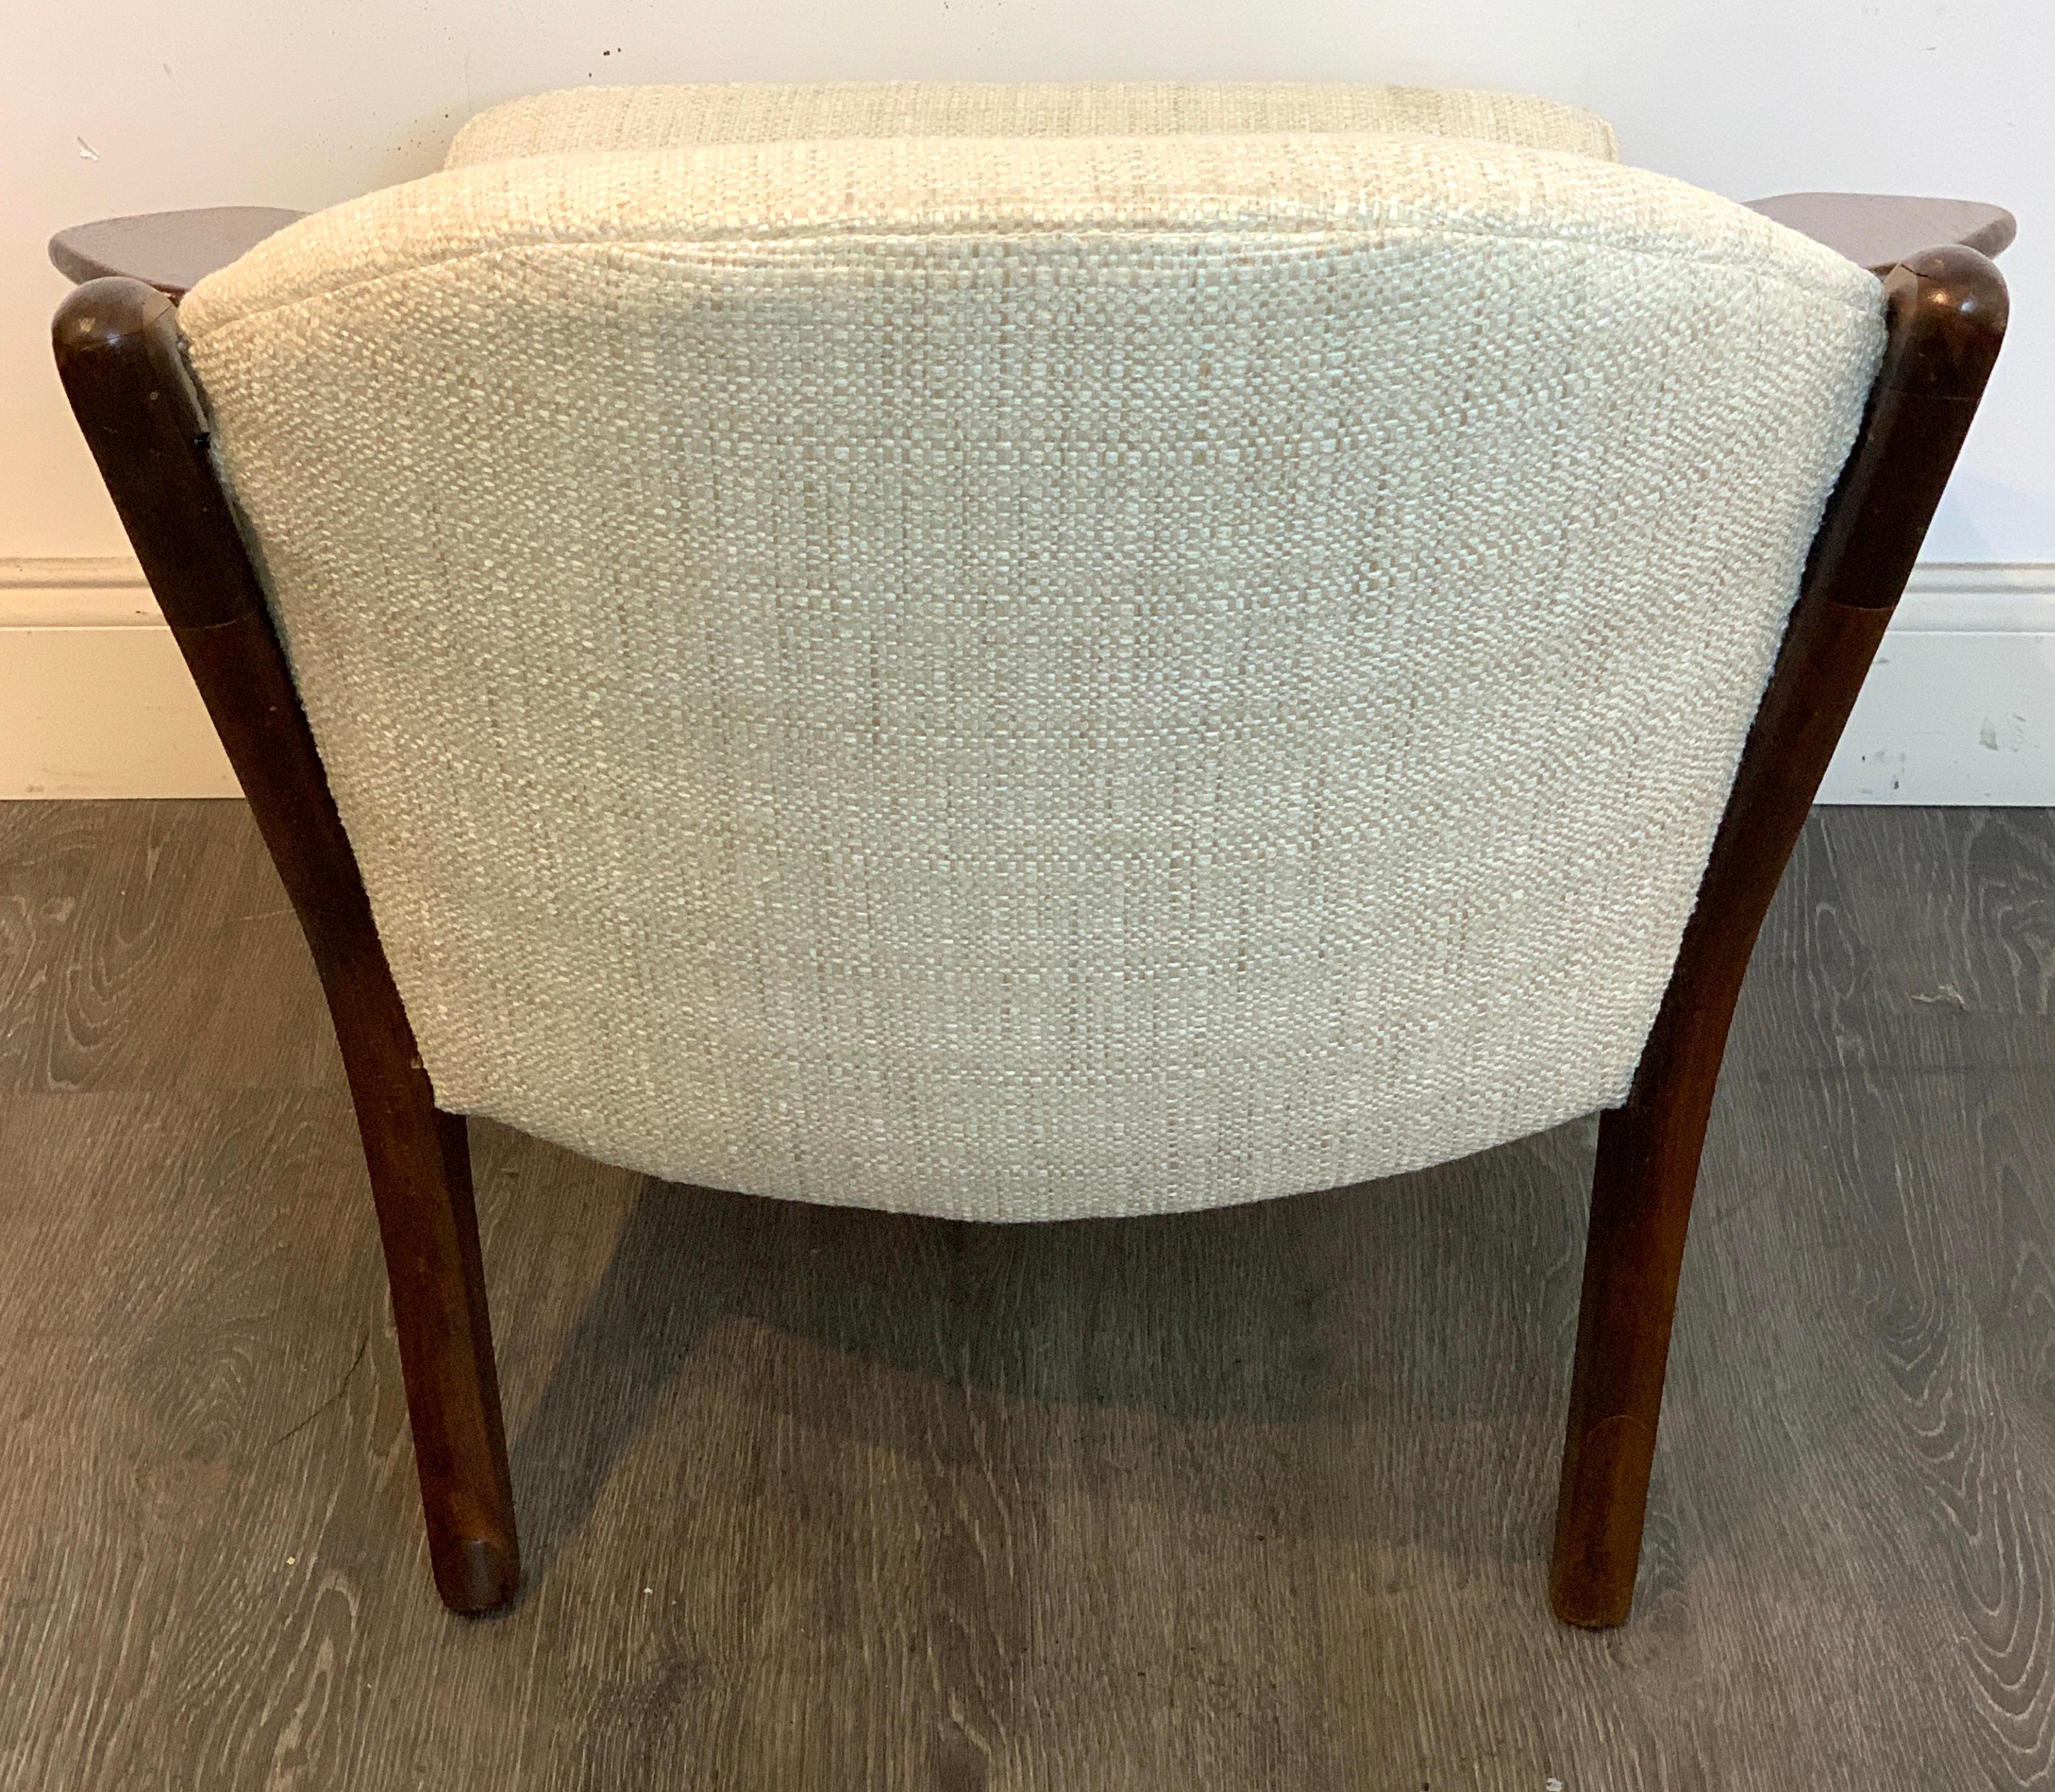 20th Century Adrian Pearsall for Craft Associates Lounge Chair #2249-C, Restored